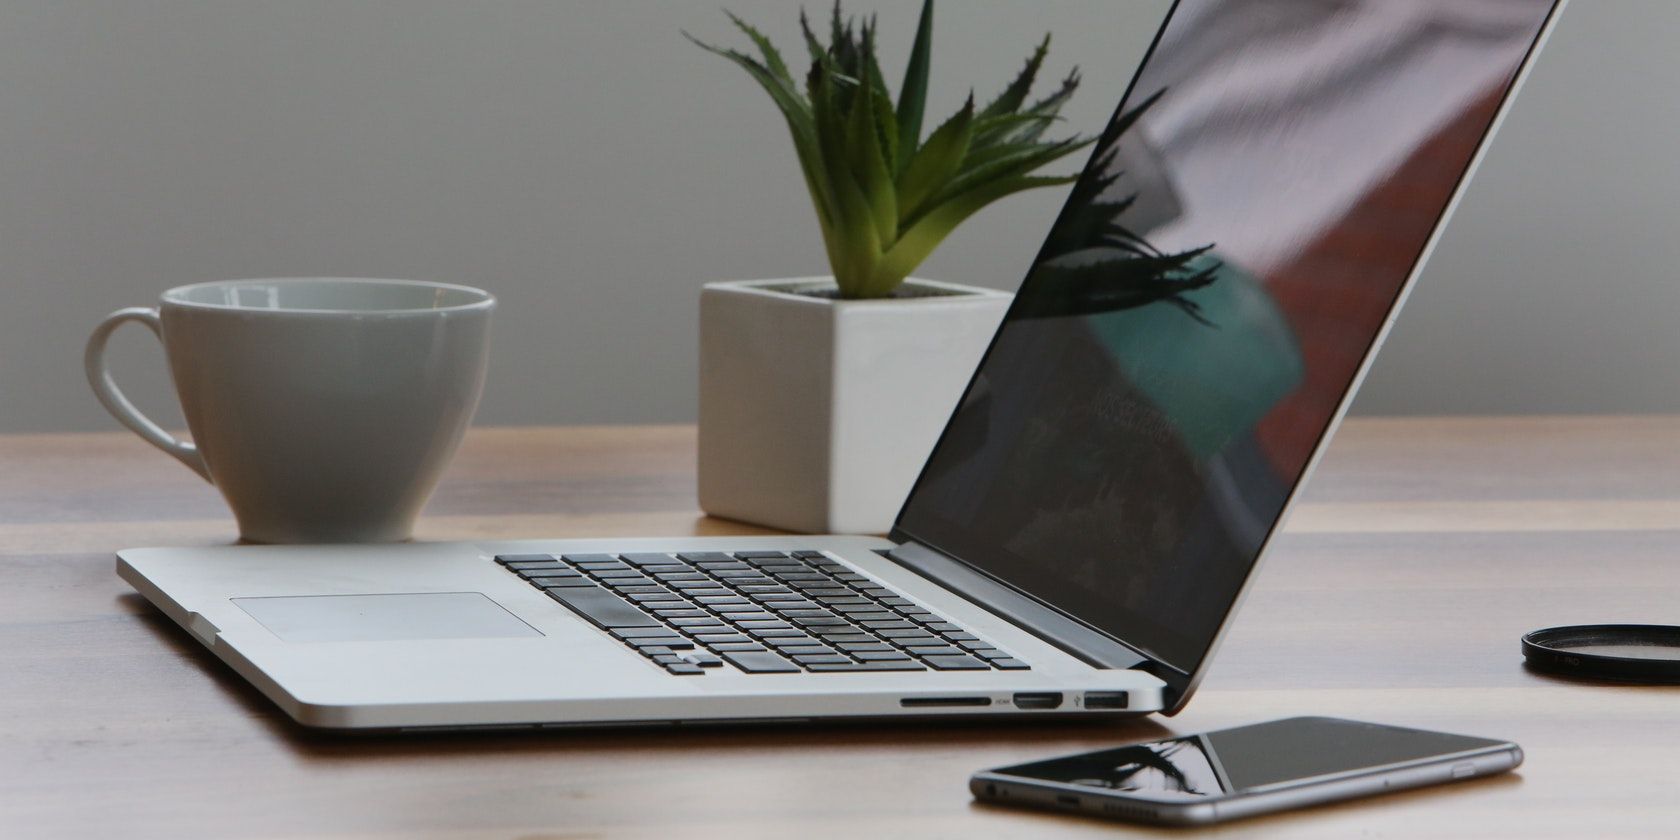 A sleek-looking laptop on a table next to a plant, mug, and mobile phone